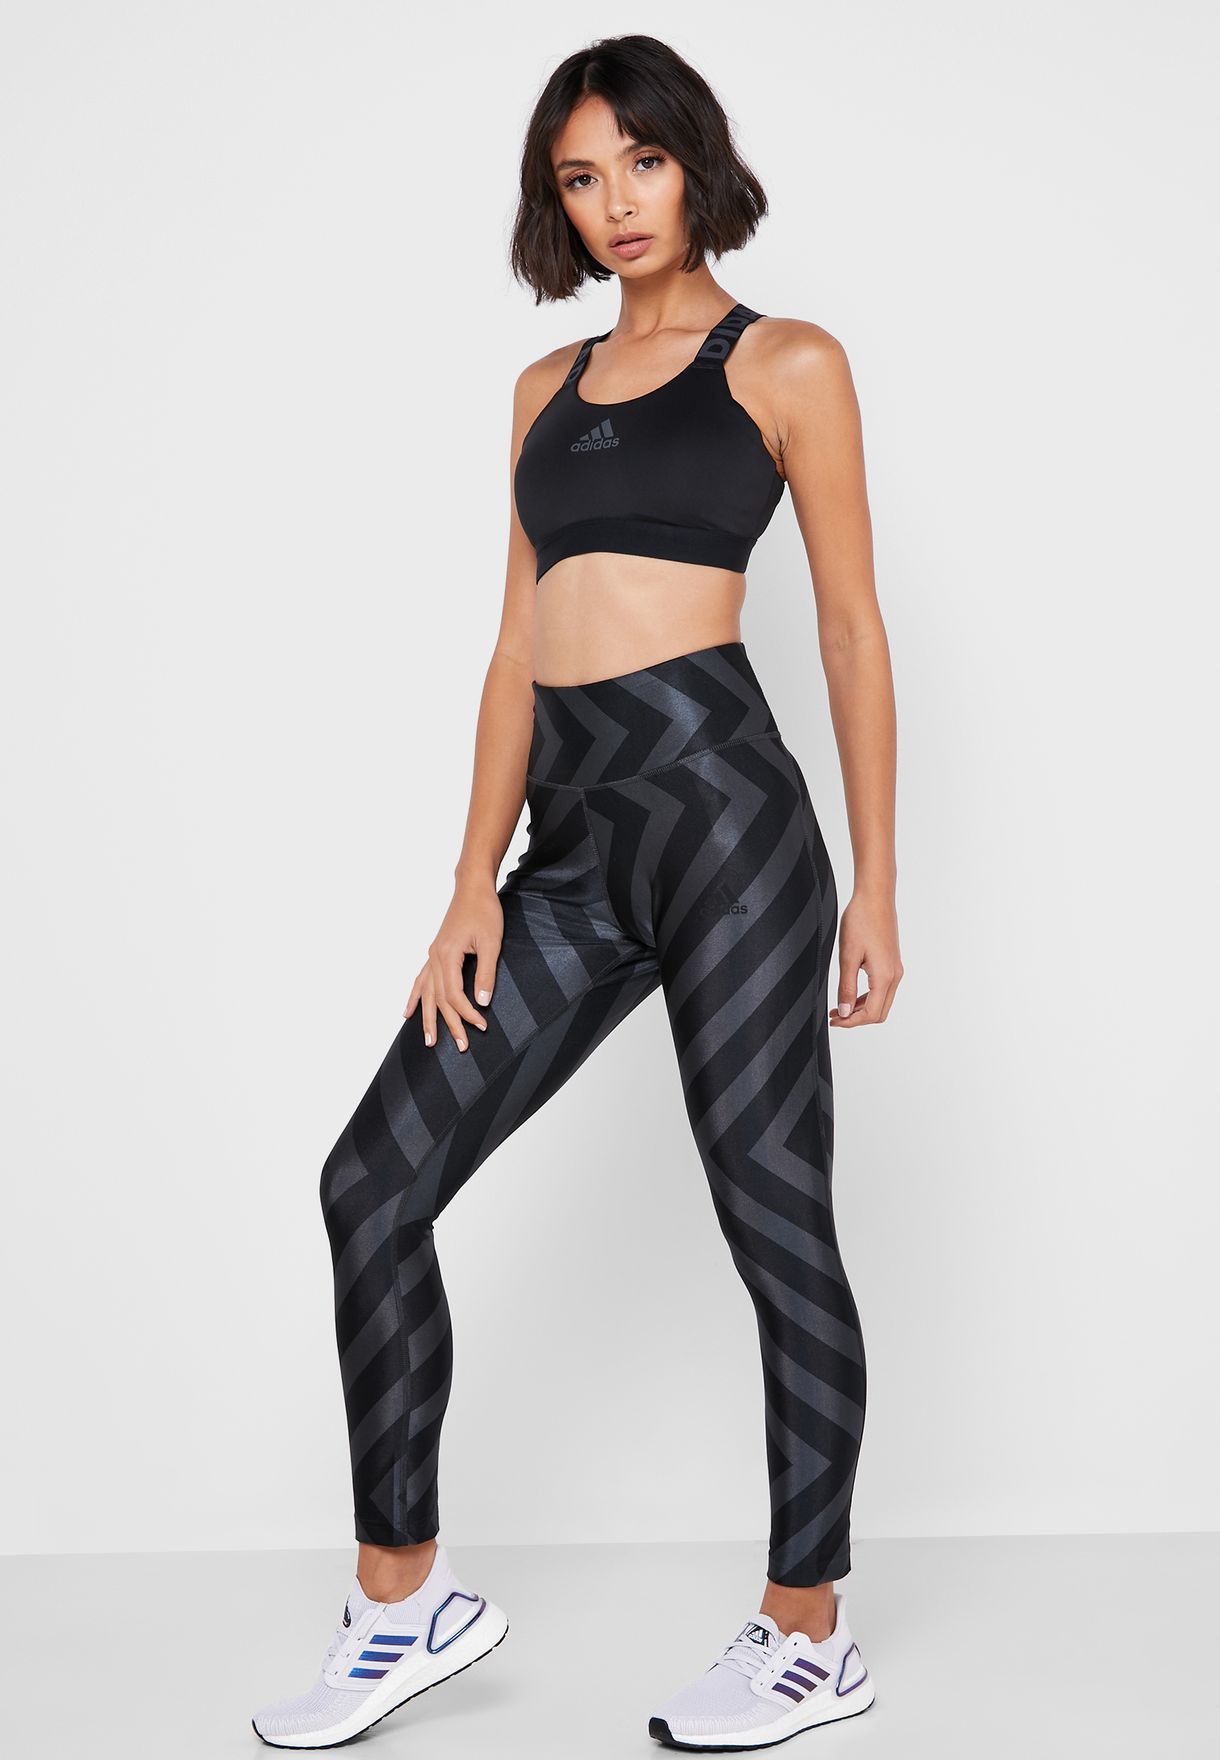 what to wear with grey adidas leggings women's